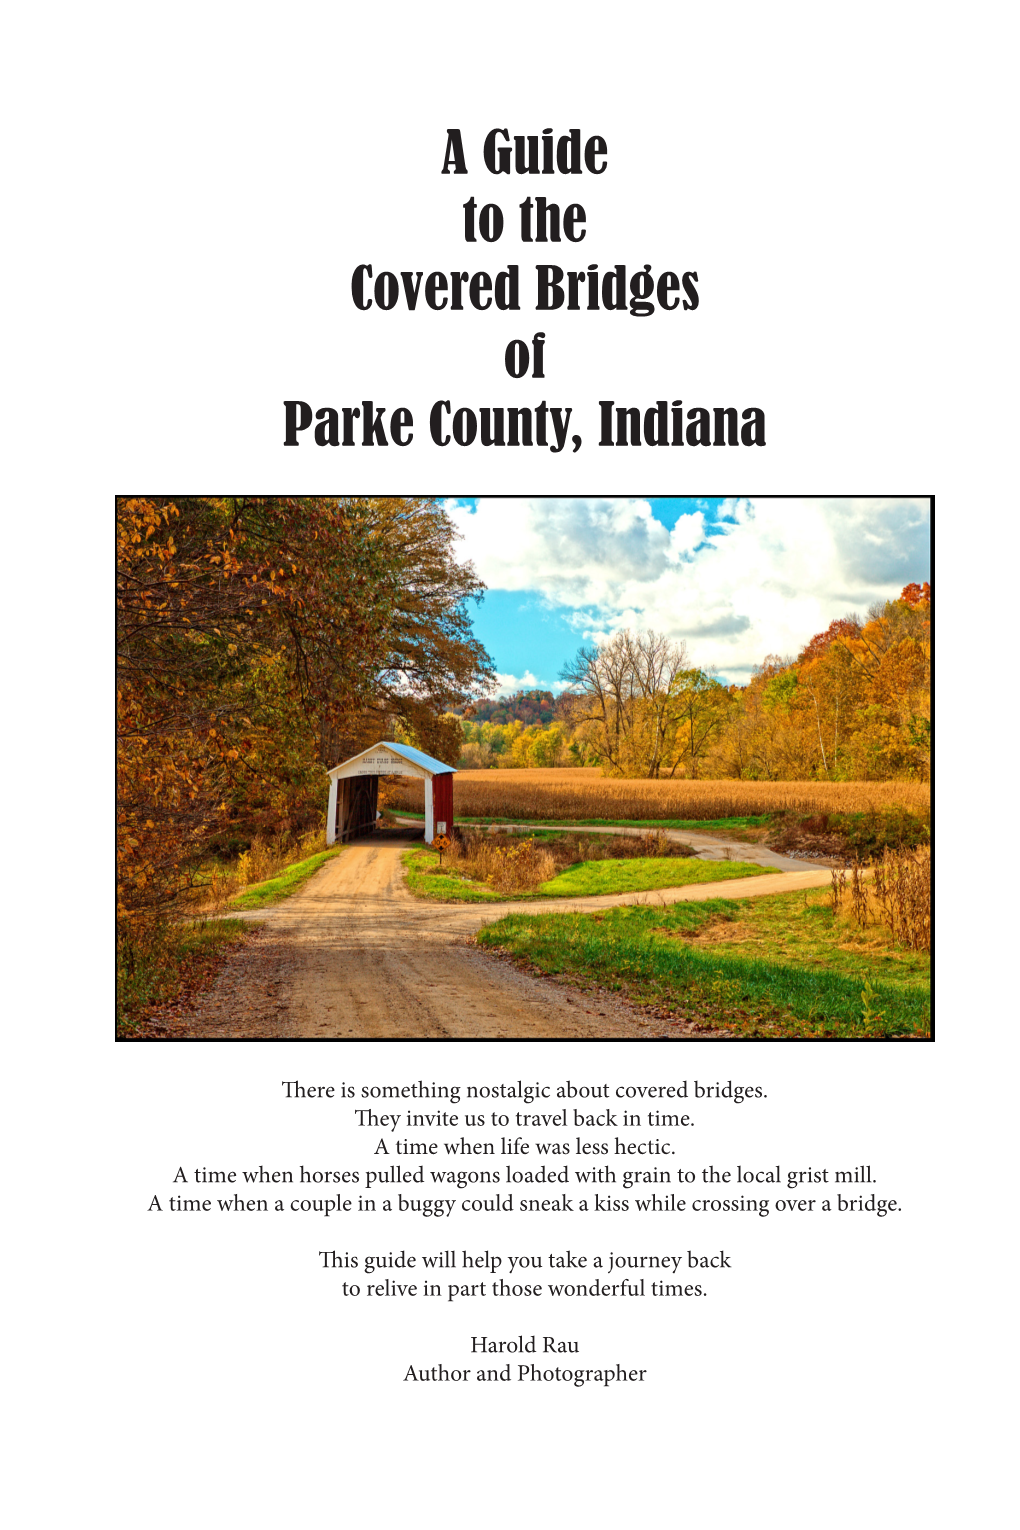 A Guide to the Covered Bridges of Parke County, Indiana